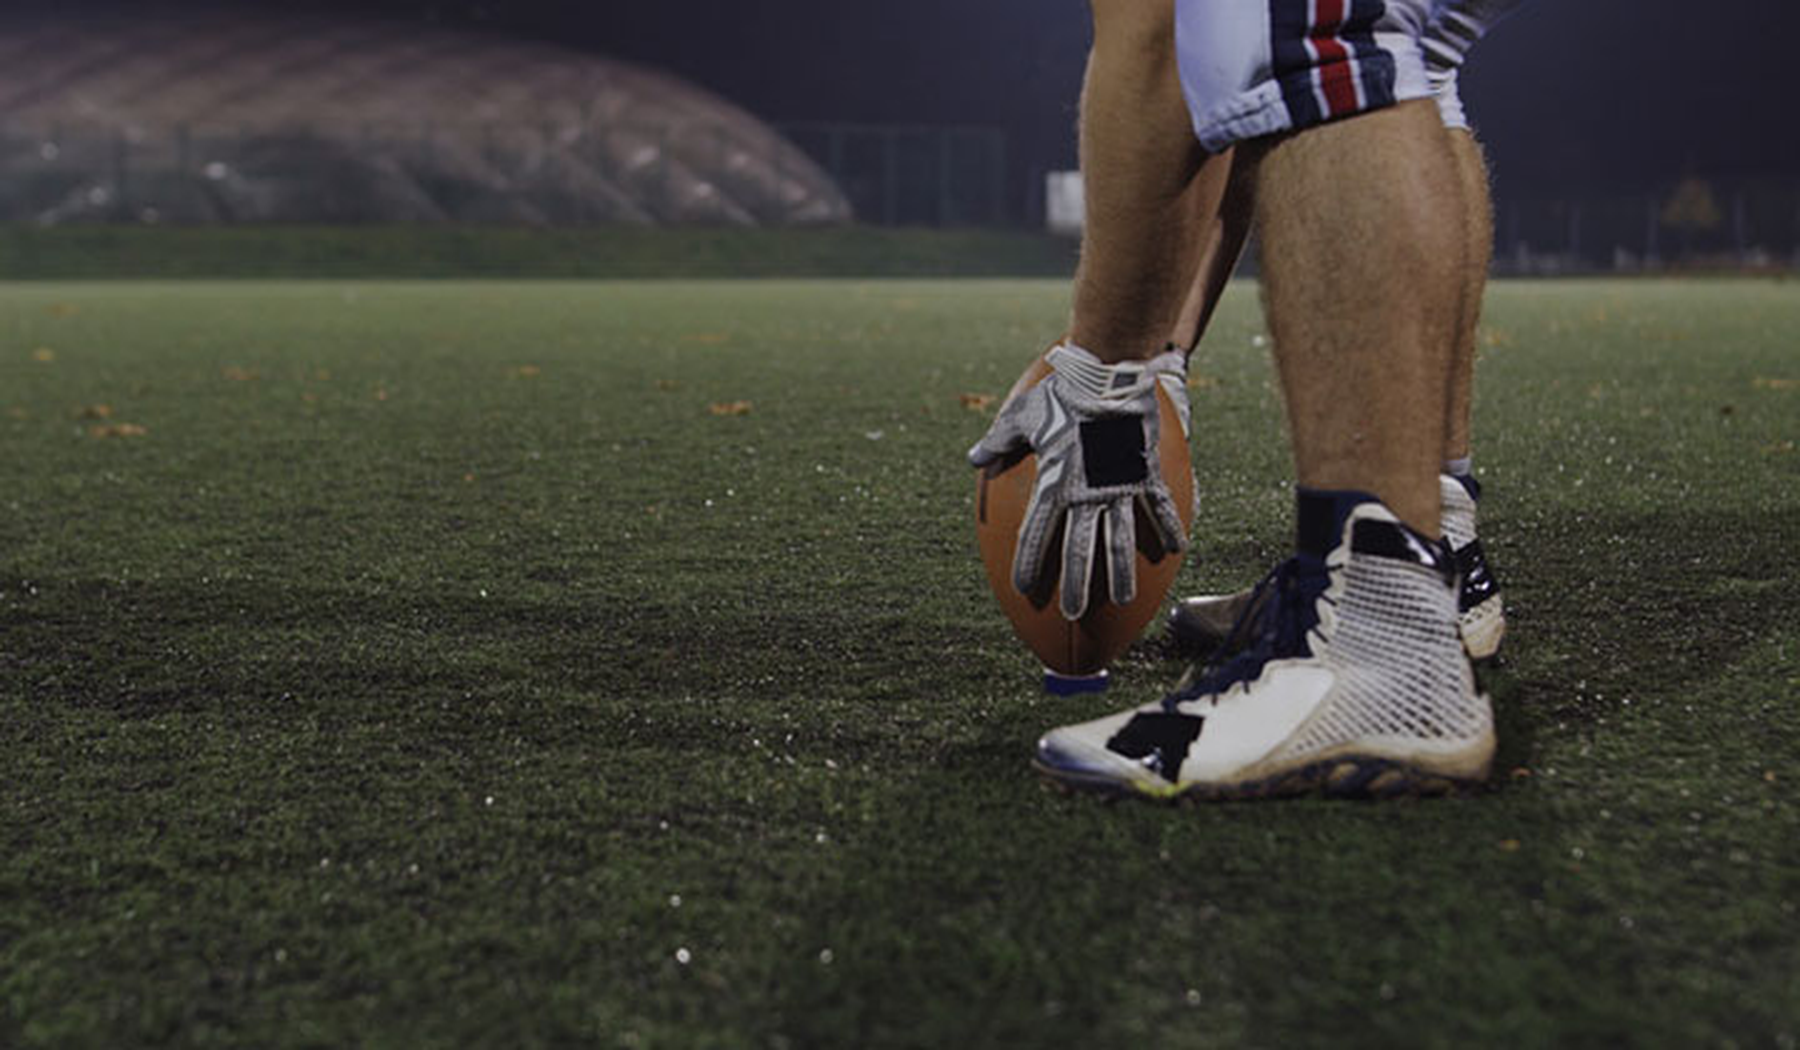 American football player on field at night